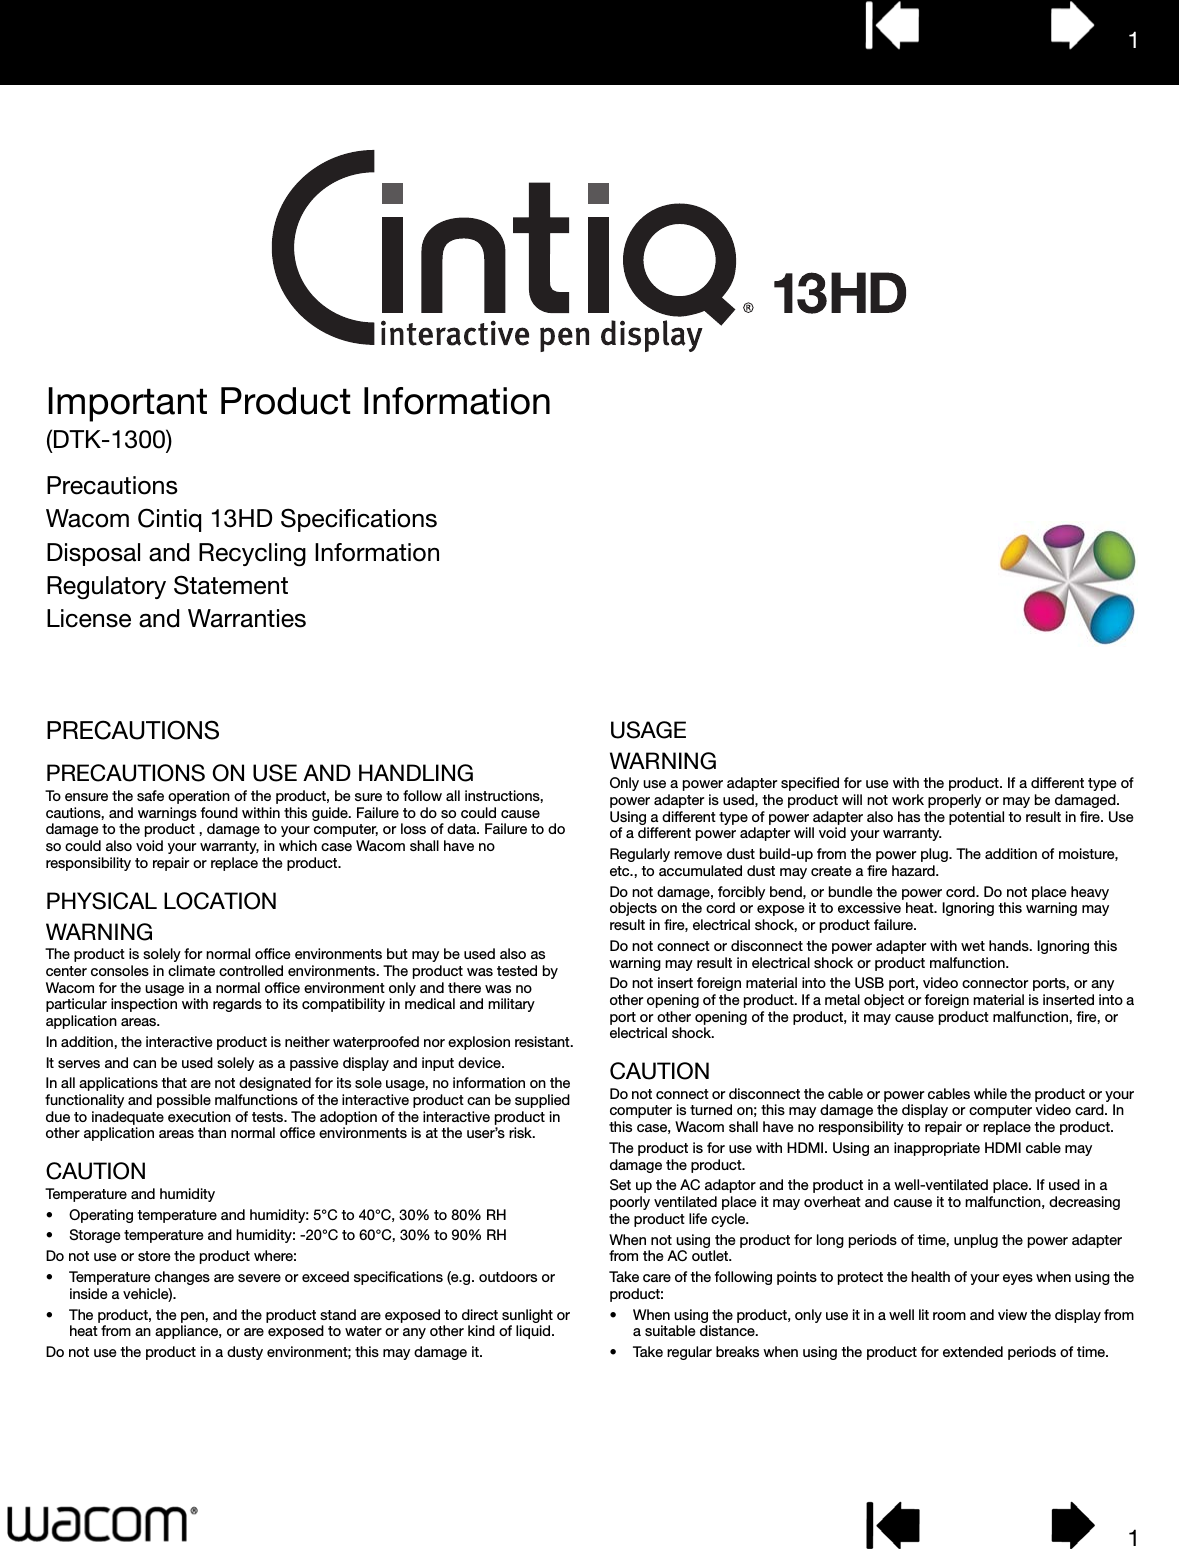 11Important Product Information(DTK-1300)PrecautionsWacom Cintiq 13HD SpecificationsDisposal and Recycling InformationRegulatory StatementLicense and WarrantiesPRECAUTIONSPRECAUTIONS ON USE AND HANDLINGTo ensure the safe operation of the product, be sure to follow all instructions, cautions, and warnings found within this guide. Failure to do so could cause damage to the product , damage to your computer, or loss of data. Failure to do so could also void your warranty, in which case Wacom shall have no responsibility to repair or replace the product.PHYSICAL LOCATIONWARNINGThe product is solely for normal office environments but may be used also as center consoles in climate controlled environments. The product was tested by Wacom for the usage in a normal office environment only and there was no particular inspection with regards to its compatibility in medical and military application areas.In addition, the interactive product is neither waterproofed nor explosion resistant.It serves and can be used solely as a passive display and input device.In all applications that are not designated for its sole usage, no information on the functionality and possible malfunctions of the interactive product can be supplied due to inadequate execution of tests. The adoption of the interactive product in other application areas than normal office environments is at the user’s risk.CAUTIONTemperature and humidity• Operating temperature and humidity: 5°C to 40°C, 30% to 80% RH• Storage temperature and humidity: -20°C to 60°C, 30% to 90% RHDo not use or store the product where:• Temperature changes are severe or exceed specifications (e.g. outdoors or inside a vehicle).• The product, the pen, and the product stand are exposed to direct sunlight or heat from an appliance, or are exposed to water or any other kind of liquid.Do not use the product in a dusty environment; this may damage it.USAGEWARNINGOnly use a power adapter specified for use with the product. If a different type of power adapter is used, the product will not work properly or may be damaged. Using a different type of power adapter also has the potential to result in fire. Use of a different power adapter will void your warranty.Regularly remove dust build-up from the power plug. The addition of moisture, etc., to accumulated dust may create a fire hazard.Do not damage, forcibly bend, or bundle the power cord. Do not place heavy objects on the cord or expose it to excessive heat. Ignoring this warning may result in fire, electrical shock, or product failure.Do not connect or disconnect the power adapter with wet hands. Ignoring this warning may result in electrical shock or product malfunction.Do not insert foreign material into the USB port, video connector ports, or any other opening of the product. If a metal object or foreign material is inserted into a port or other opening of the product, it may cause product malfunction, fire, or electrical shock.CAUTIONDo not connect or disconnect the cable or power cables while the product or your computer is turned on; this may damage the display or computer video card. In this case, Wacom shall have no responsibility to repair or replace the product.The product is for use with HDMI. Using an inappropriate HDMI cable may damage the product.Set up the AC adaptor and the product in a well-ventilated place. If used in a poorly ventilated place it may overheat and cause it to malfunction, decreasing the product life cycle.When not using the product for long periods of time, unplug the power adapter from the AC outlet.Take care of the following points to protect the health of your eyes when using the product:• When using the product, only use it in a well lit room and view the display from a suitable distance.• Take regular breaks when using the product for extended periods of time.